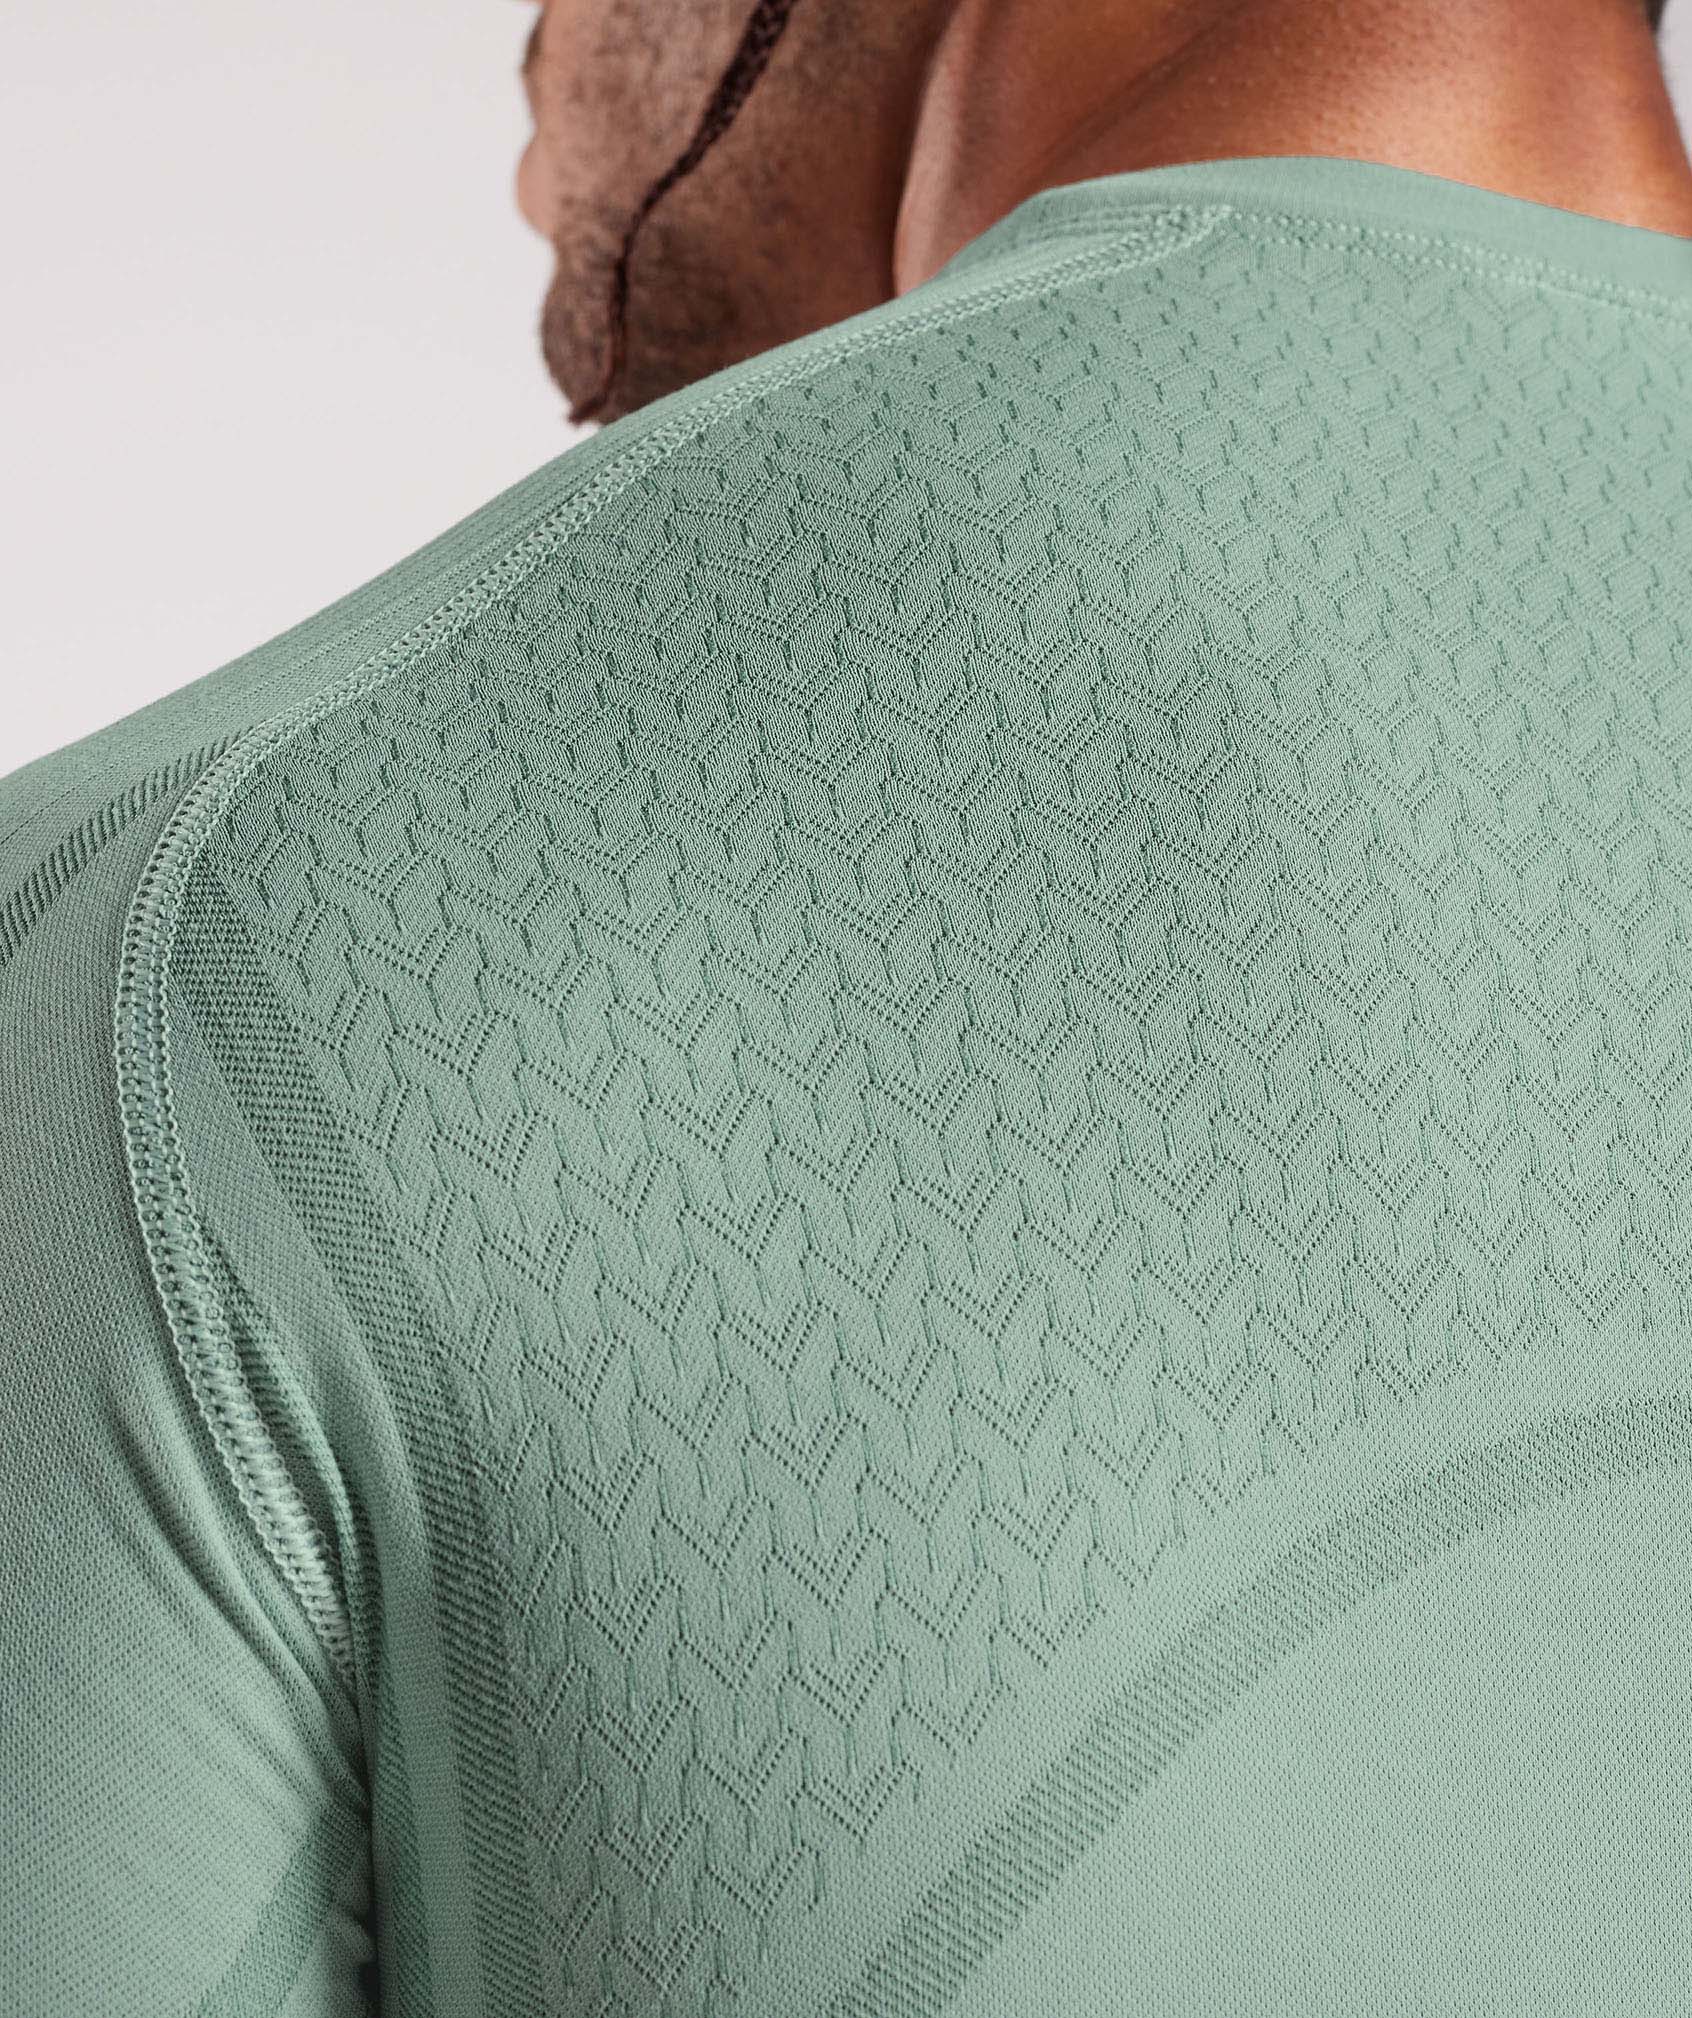 315 Seamless T-Shirt in Frost Teal/Ink Teal - view 5